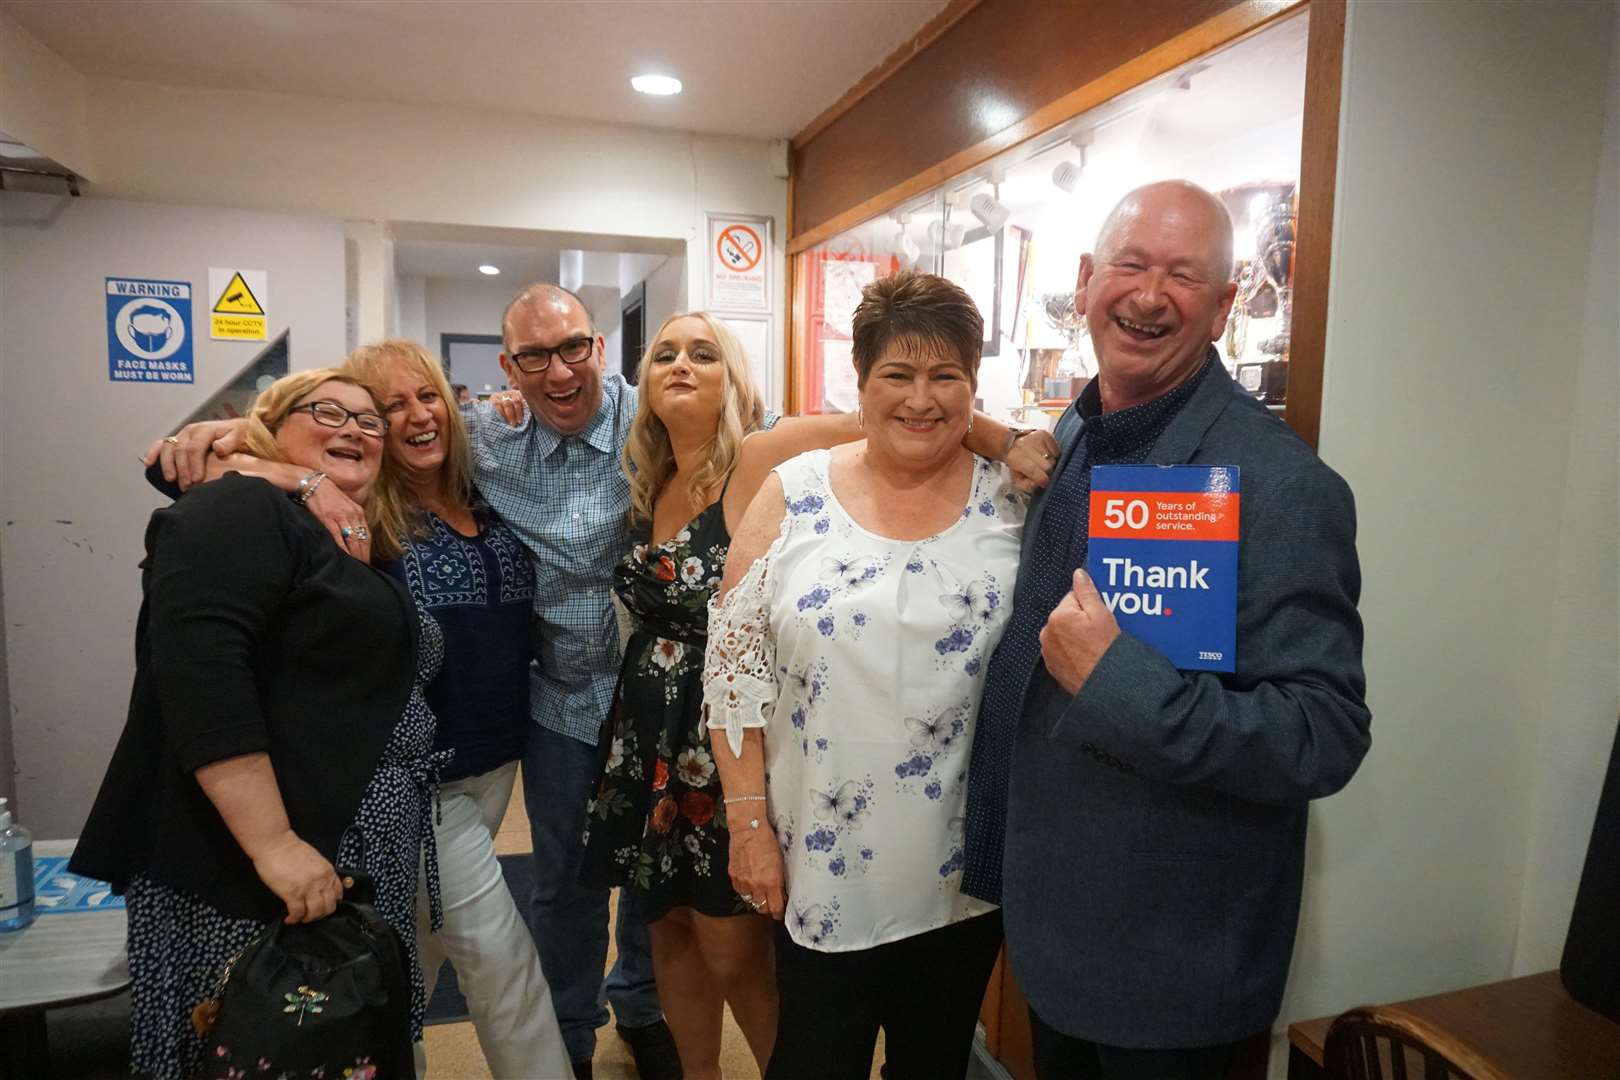 Sandy Mackenzie (right) with his wife Donna and a group of friends attending the party at Caledonian Thistle Social Club. Pictures: Federica Stefani.